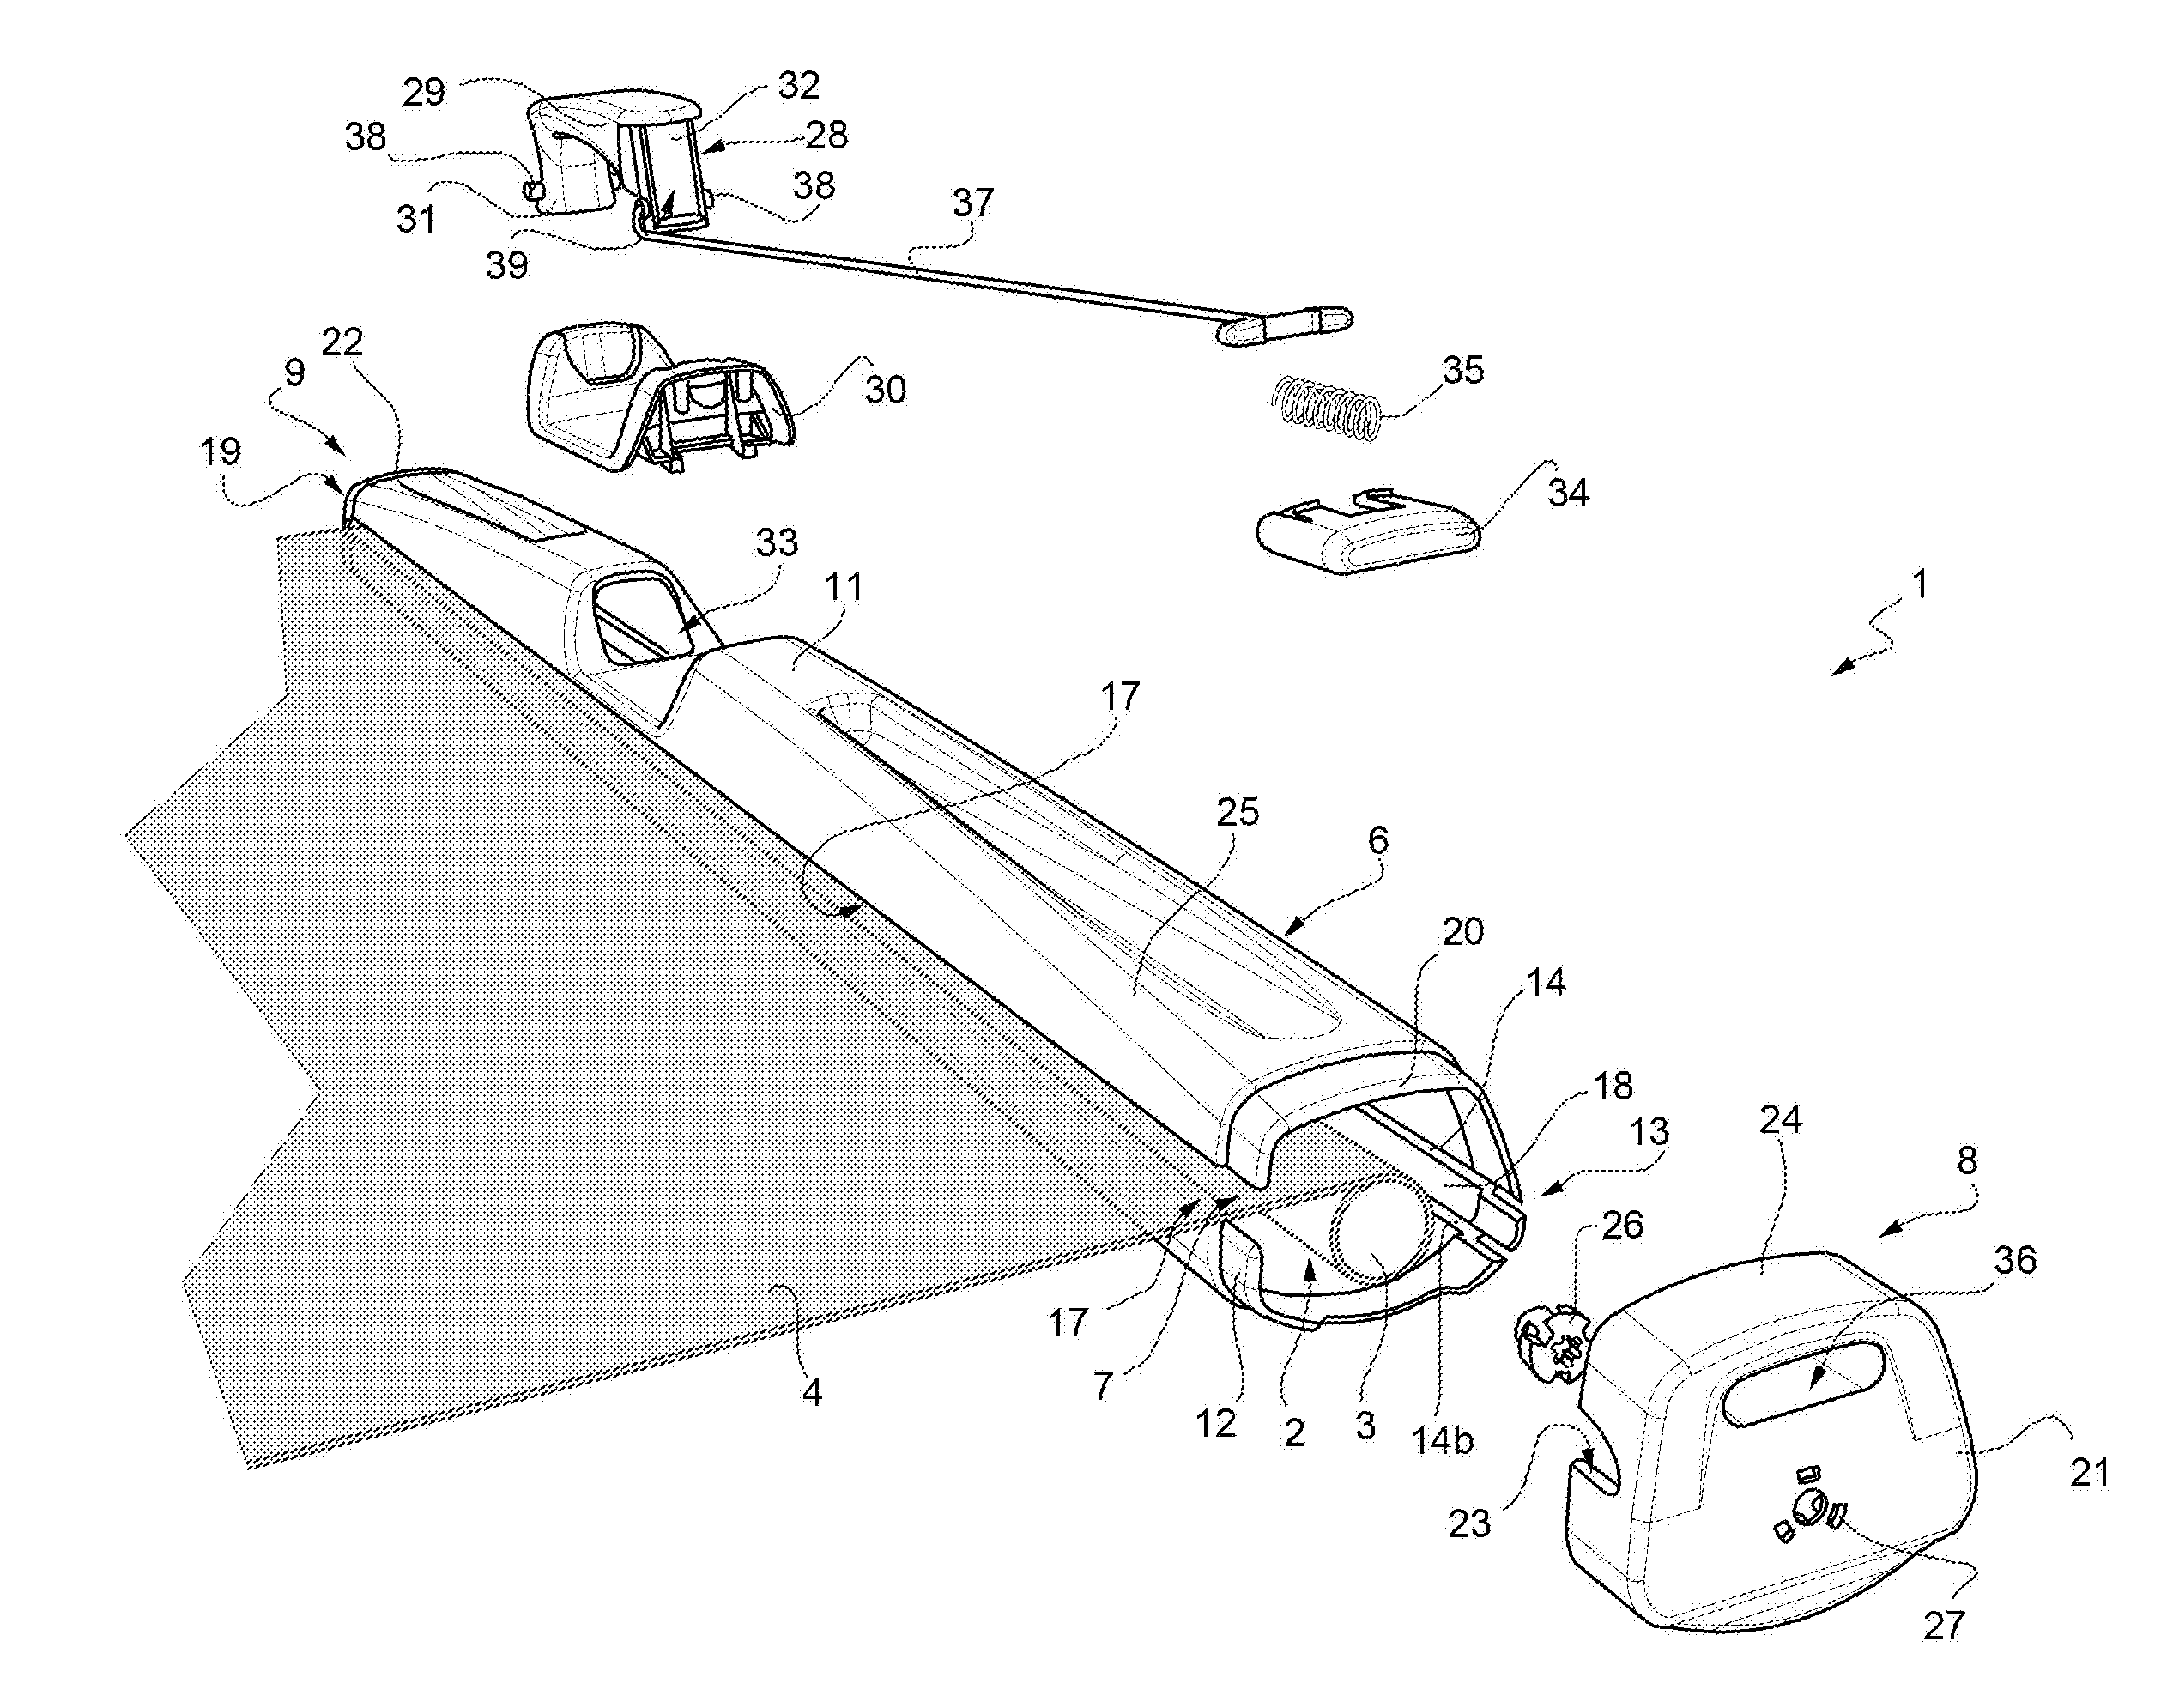 Holder of a tonneau cover or separation device for a luggage space of a vehicle